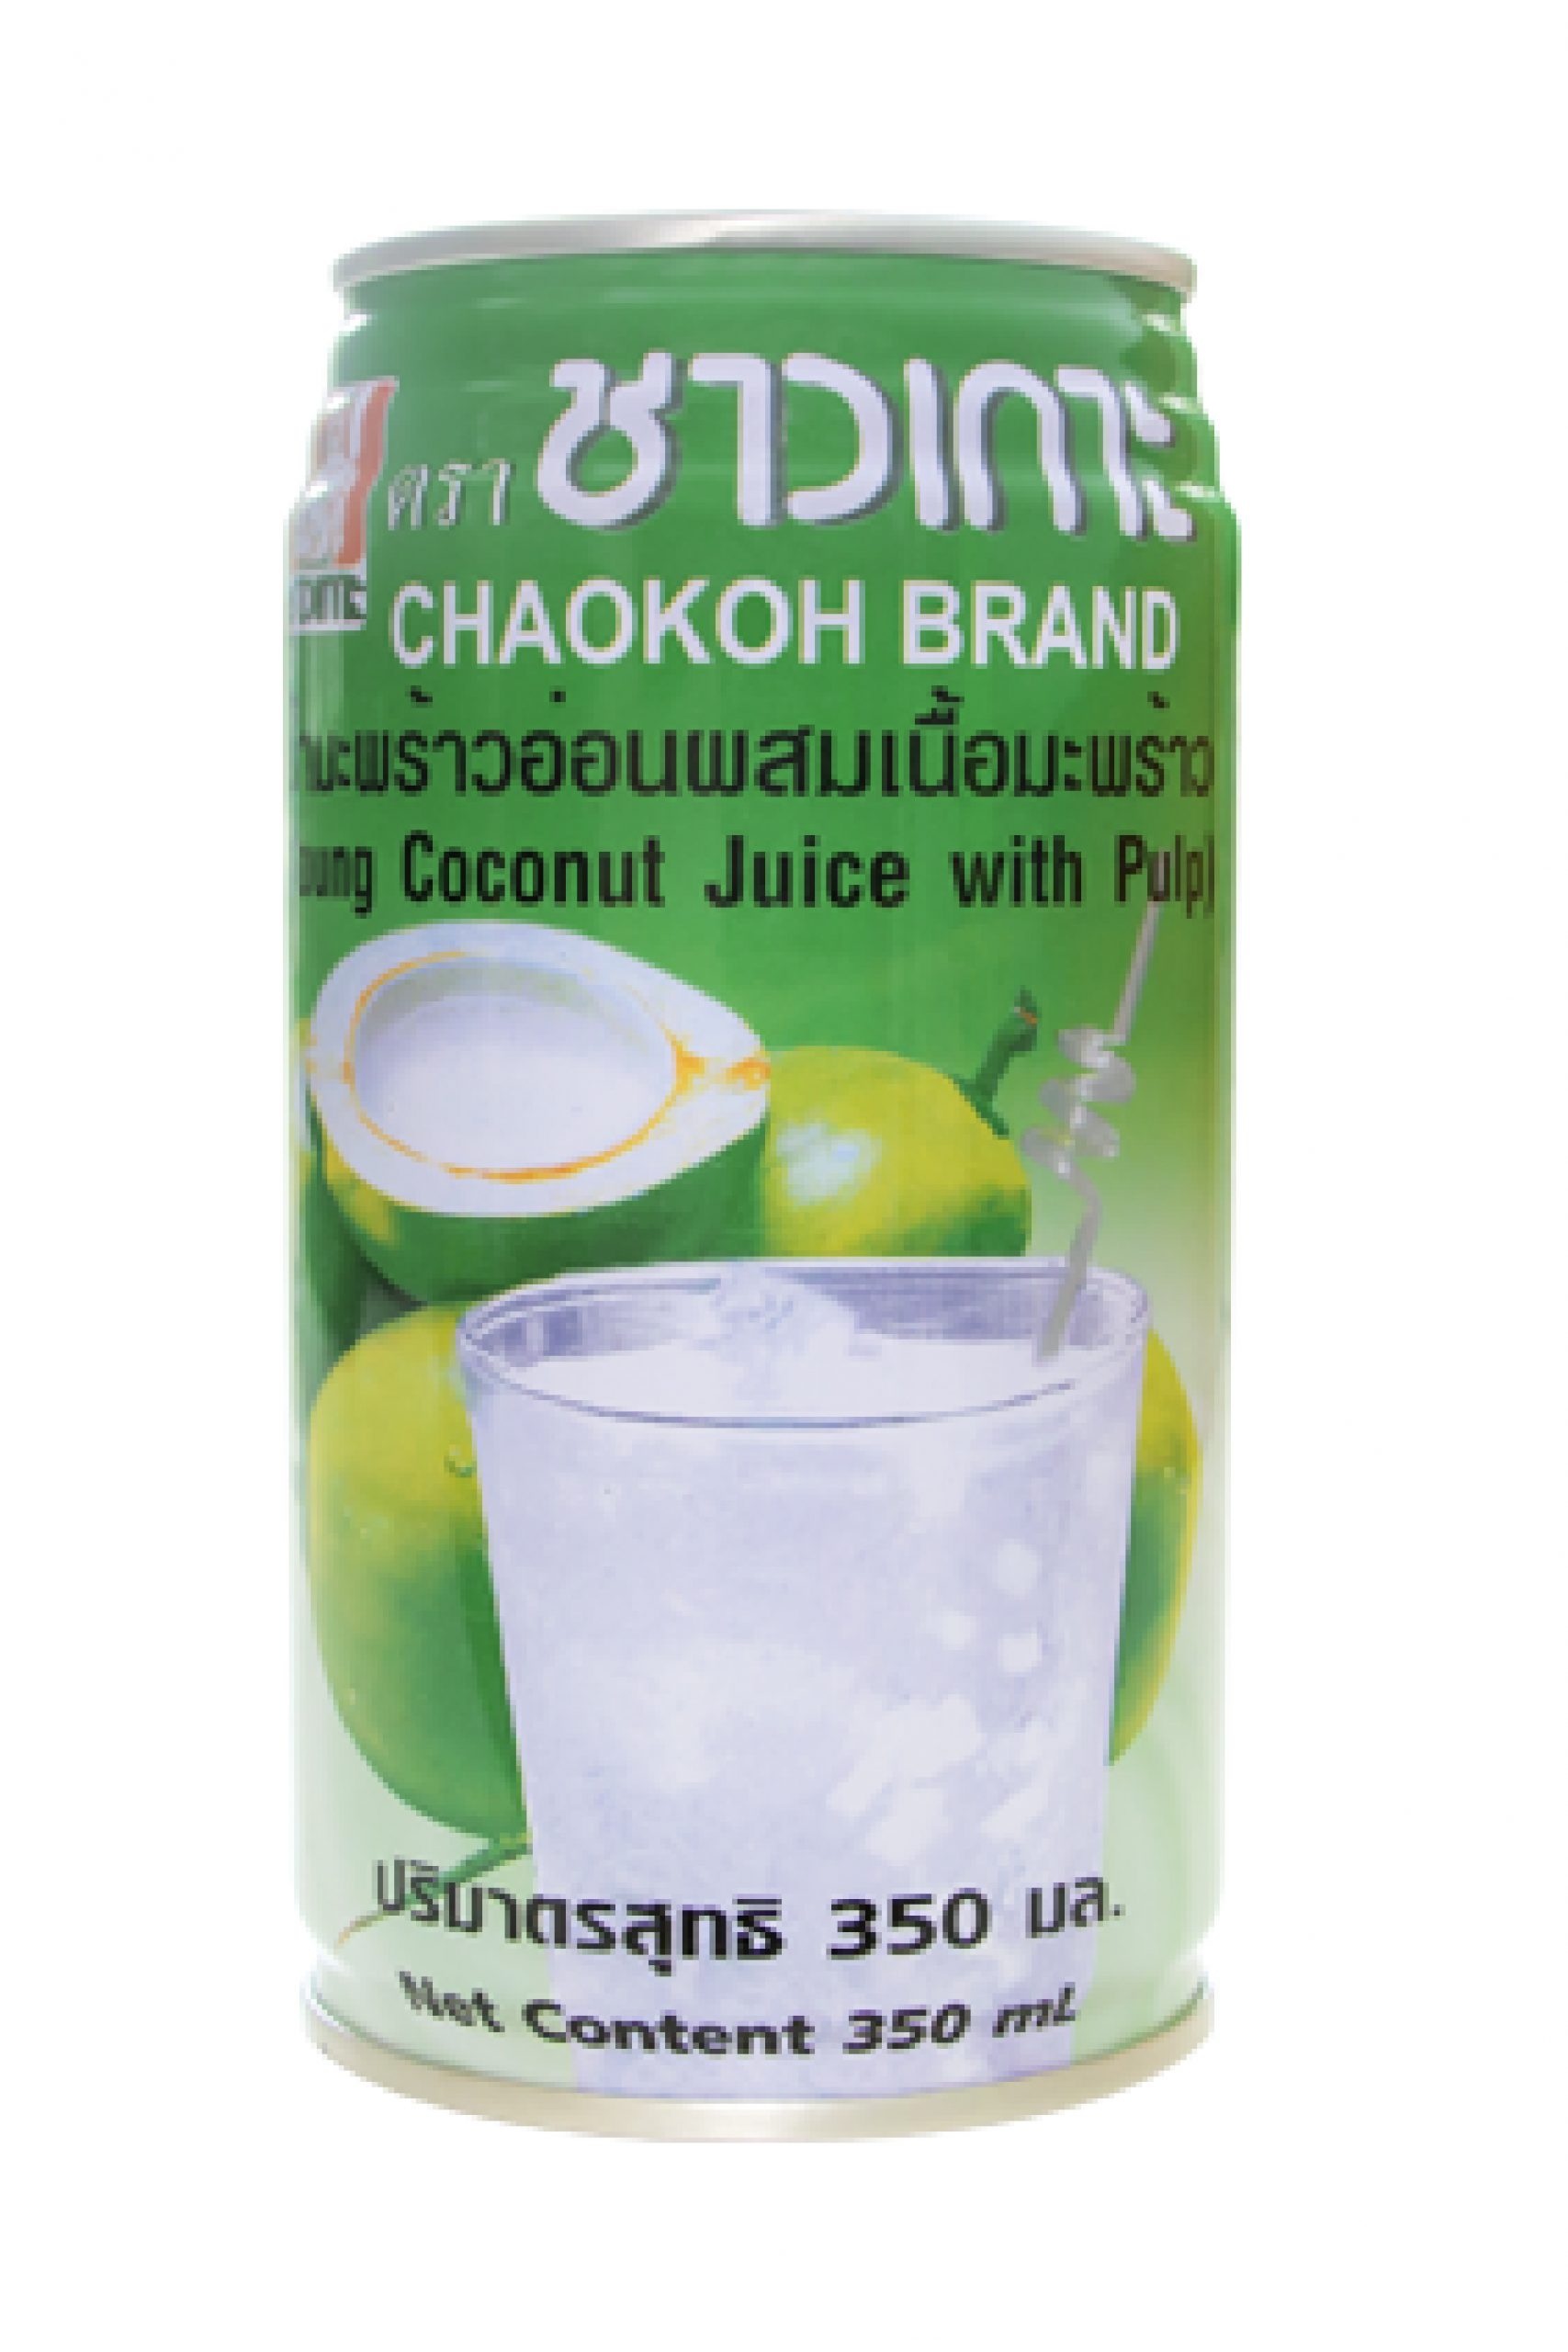 C110CK012 Chaokoh Young Coconut Juice with Pulp 24×11.8 oz – Sunlee